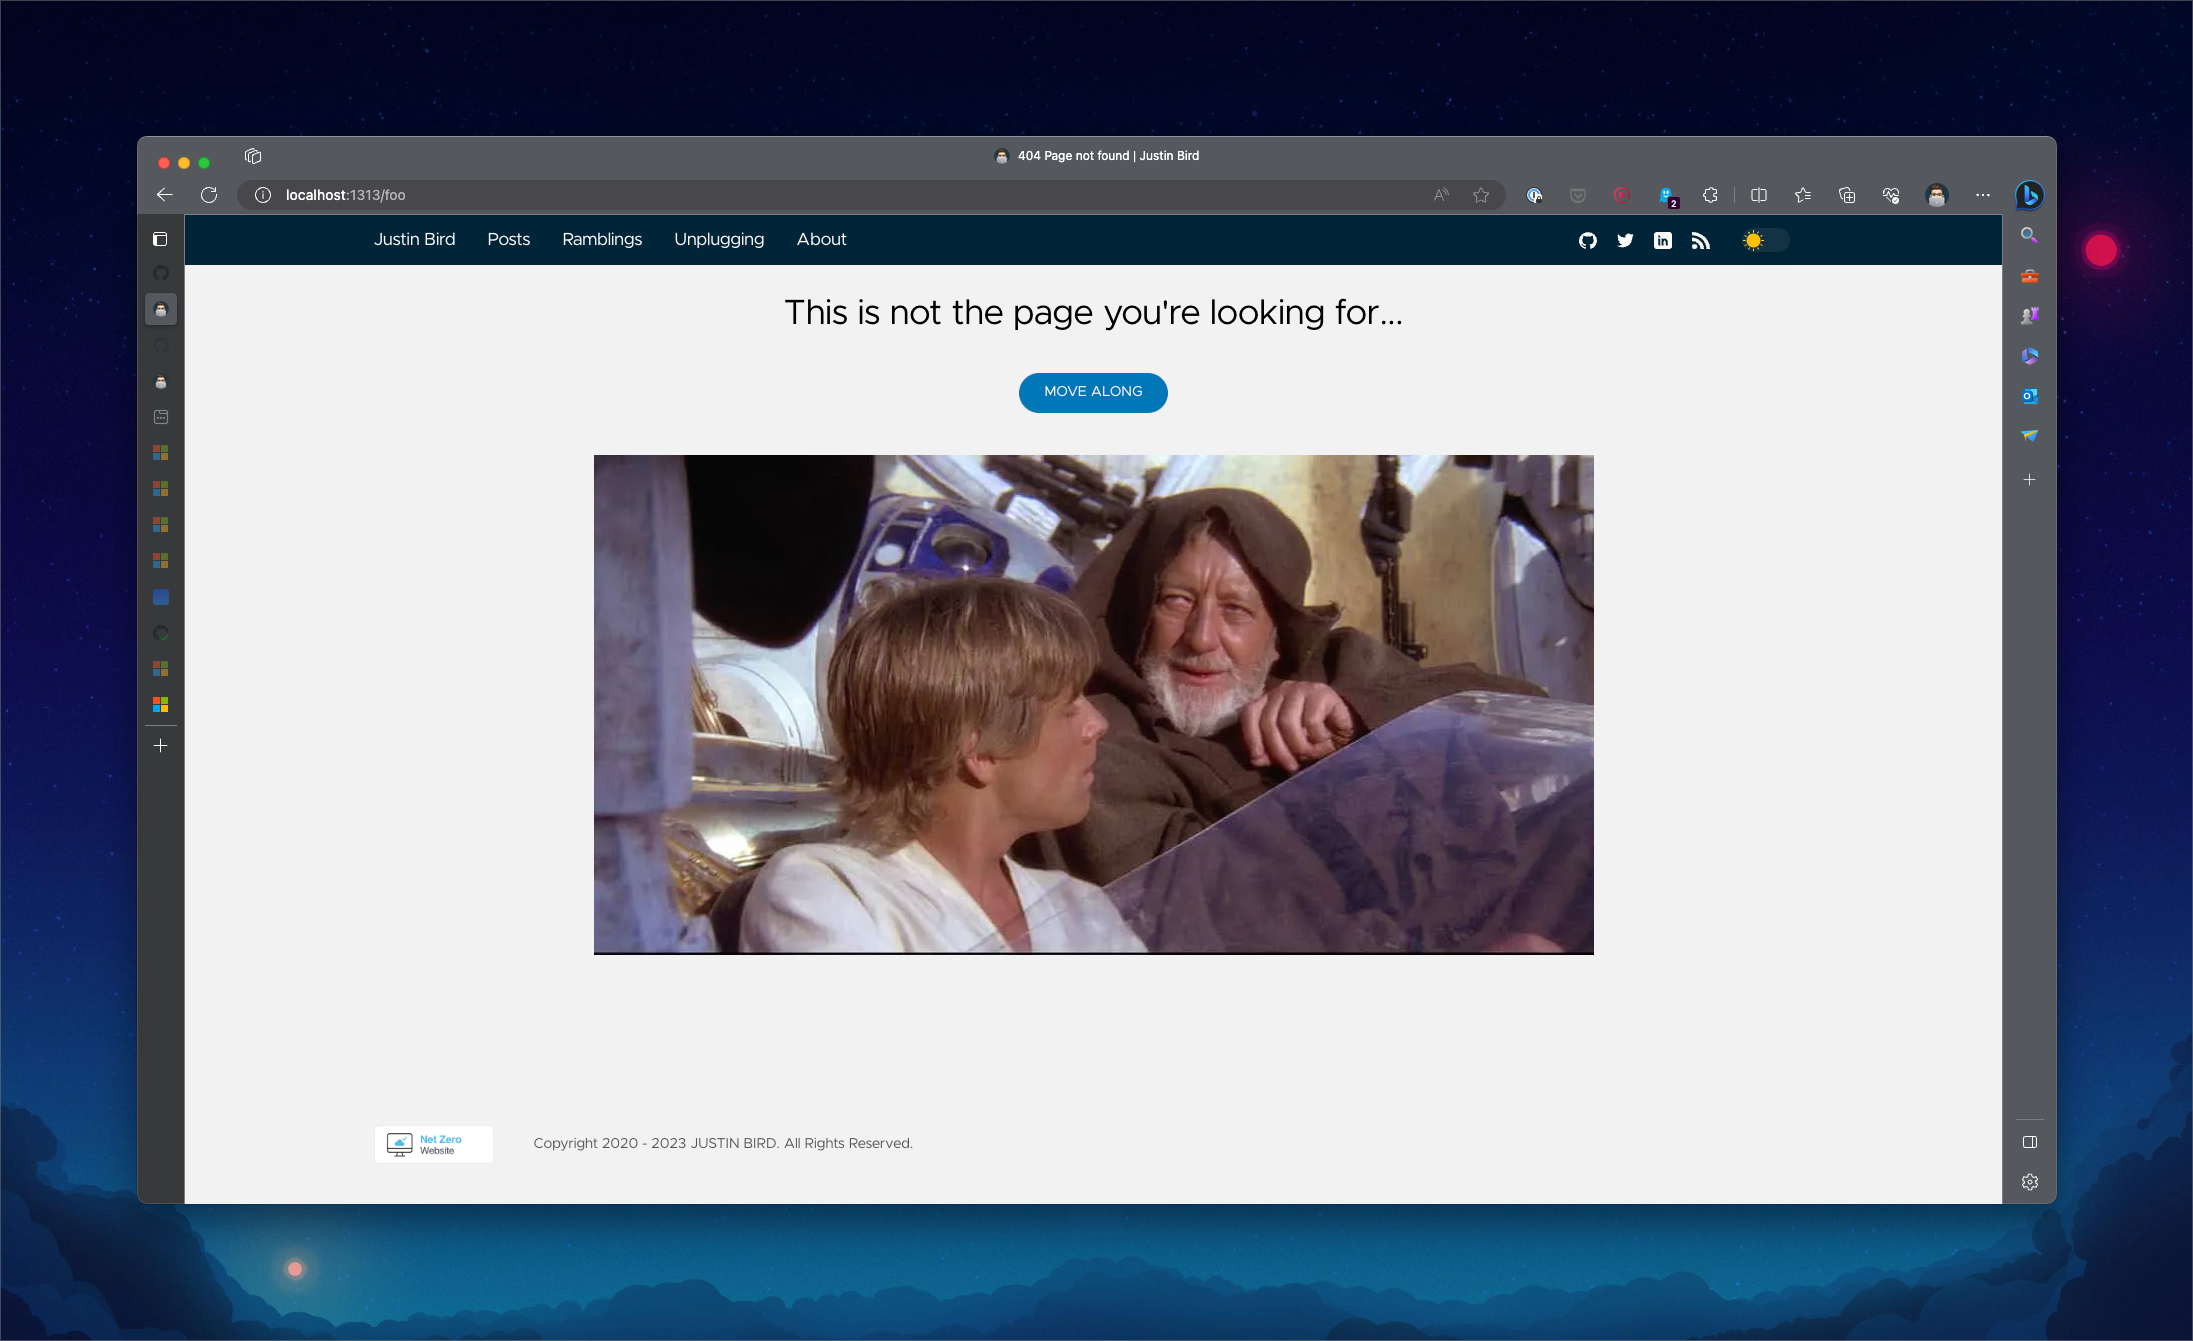 image shows a 404 page in the style of my site, it says 'This is not the page you're looking for' the button says 'move along' and is finished with an image of obi wan kenobi, sat next to luke skywalker in the land speeder about to say his famous line